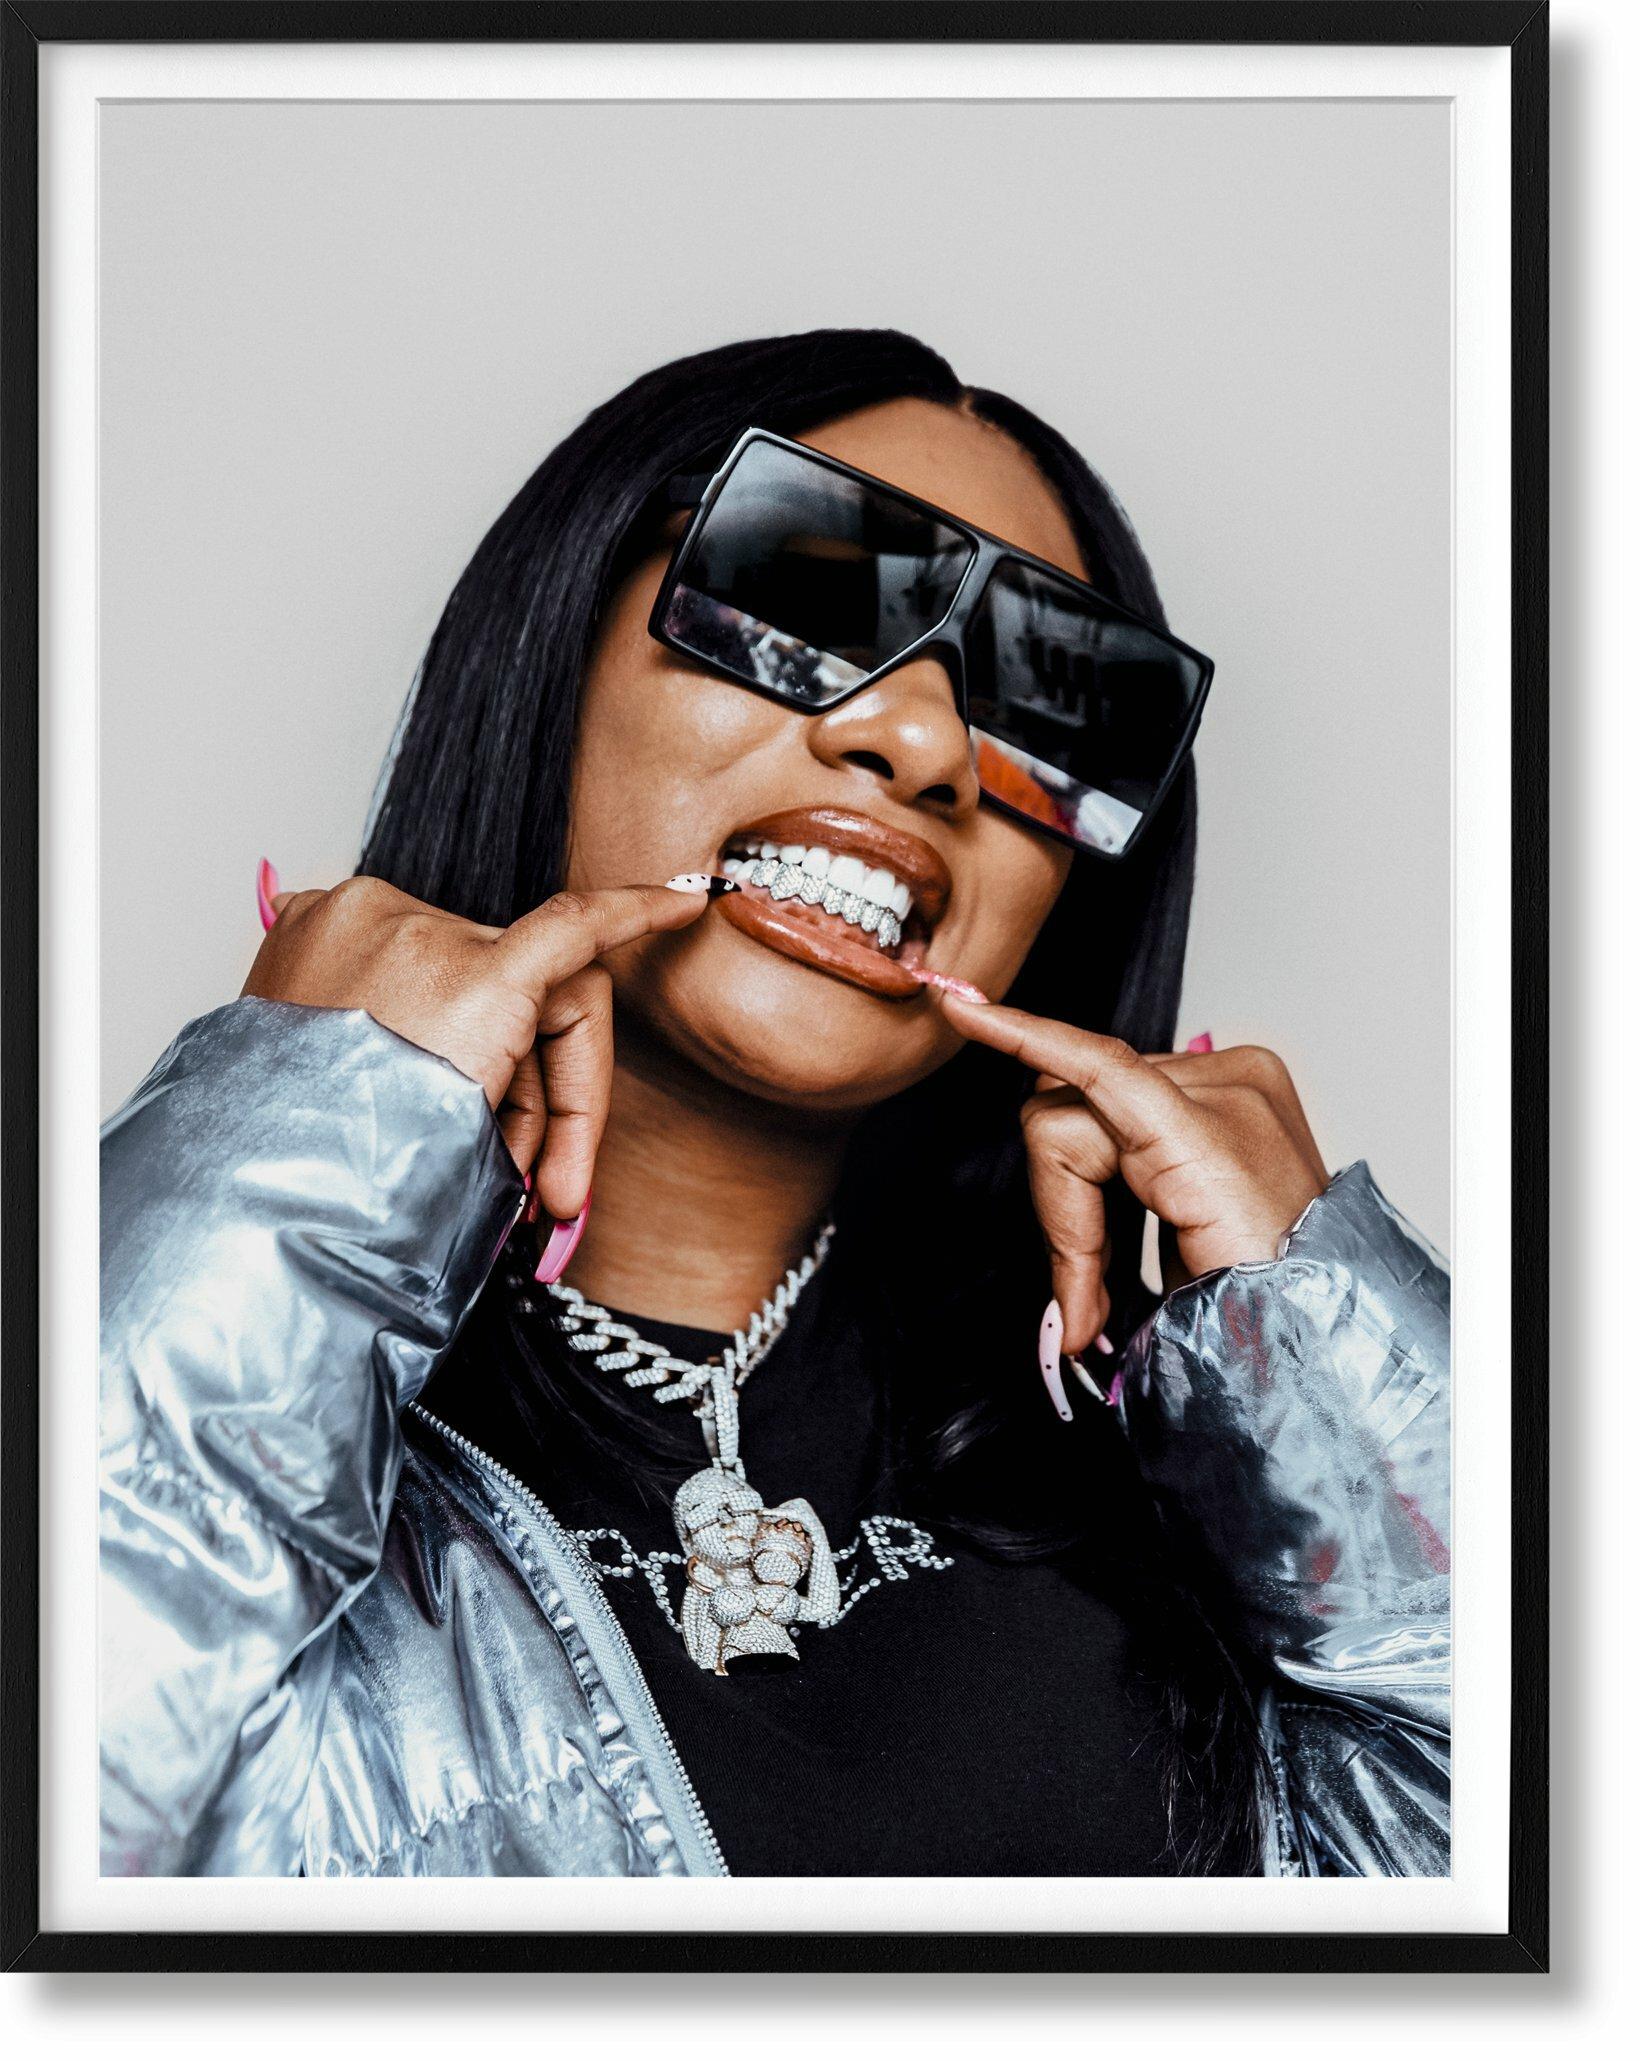 The definitive photographic history of how hip-hop blinged out and redefined the world of jewelry, luxury, and style.

Signed color inkjet print on archival paper, 16 x 20 in.; hardcover volume in a slipcase, 9.8 x 13.4 in., 6.29 lb., 388